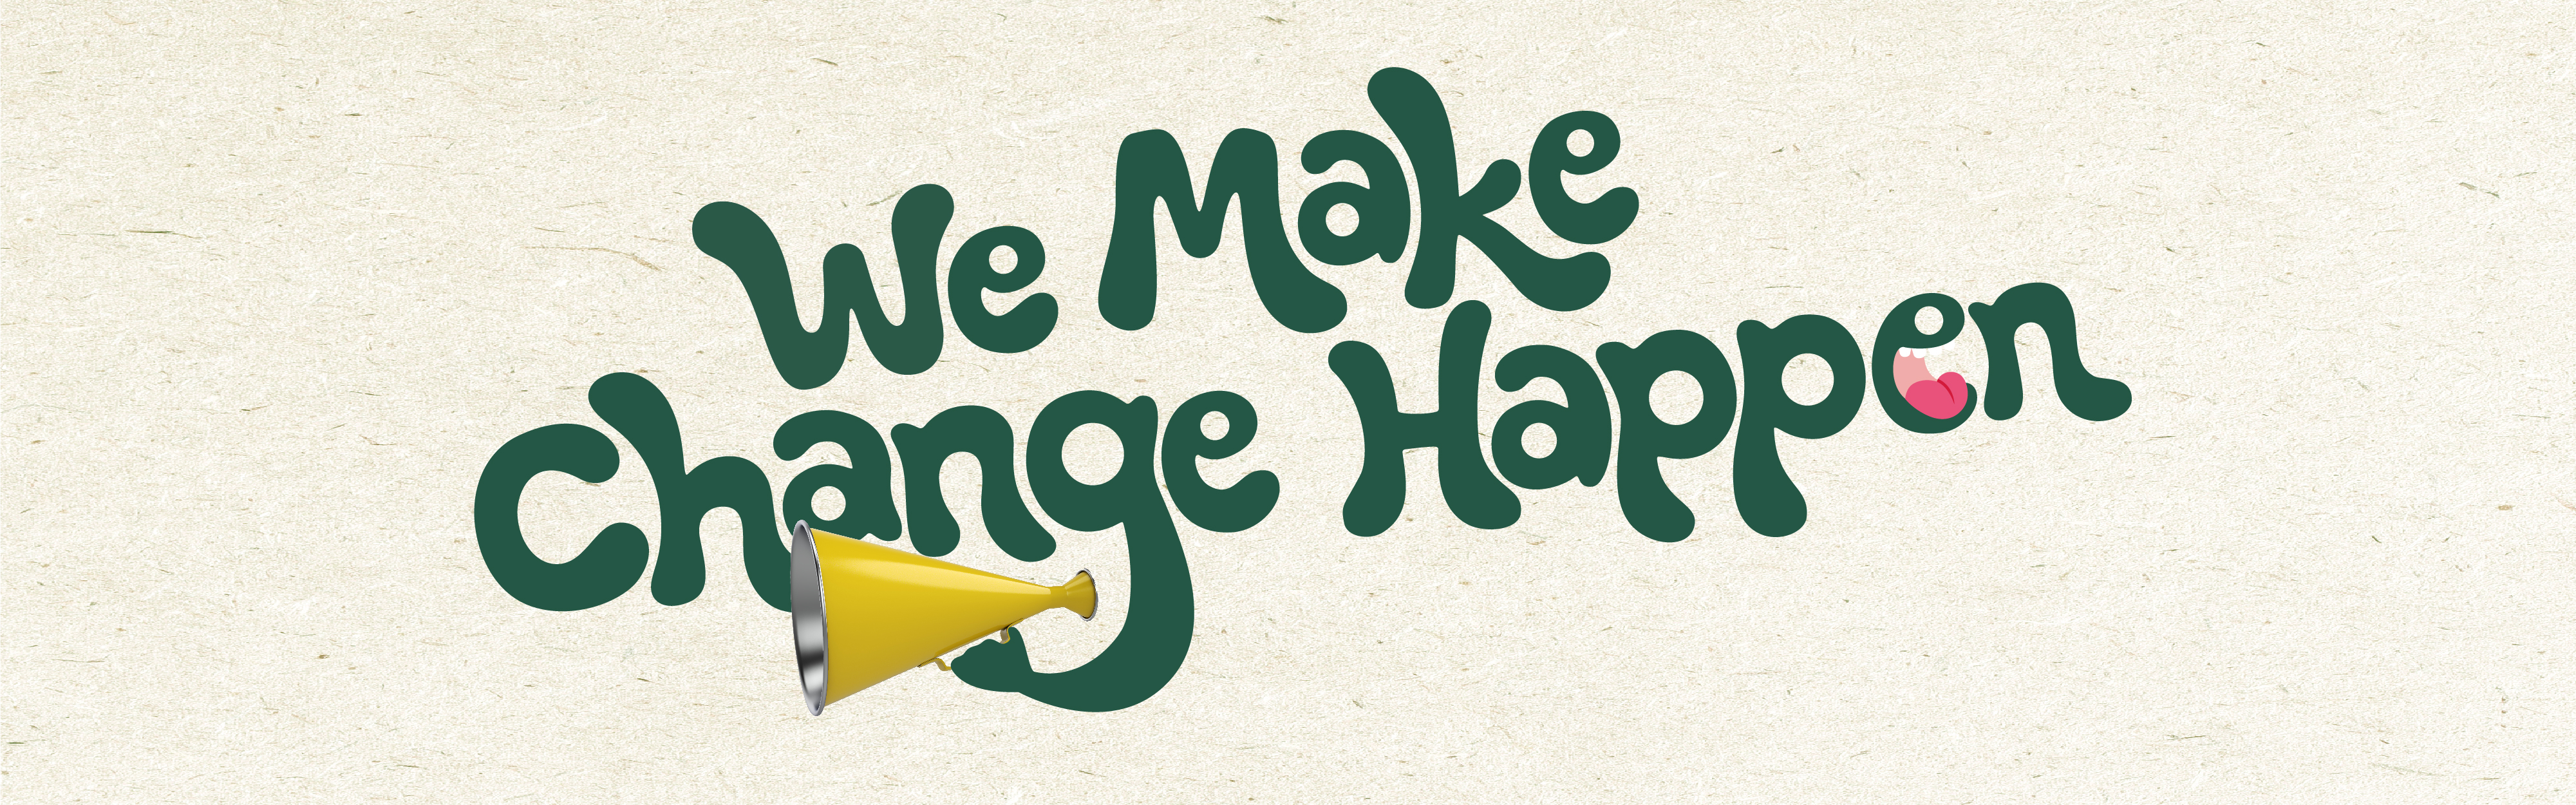 We make change happen text with two hands holding an old fashioned megaphone. Text is dark green and a beige textured background